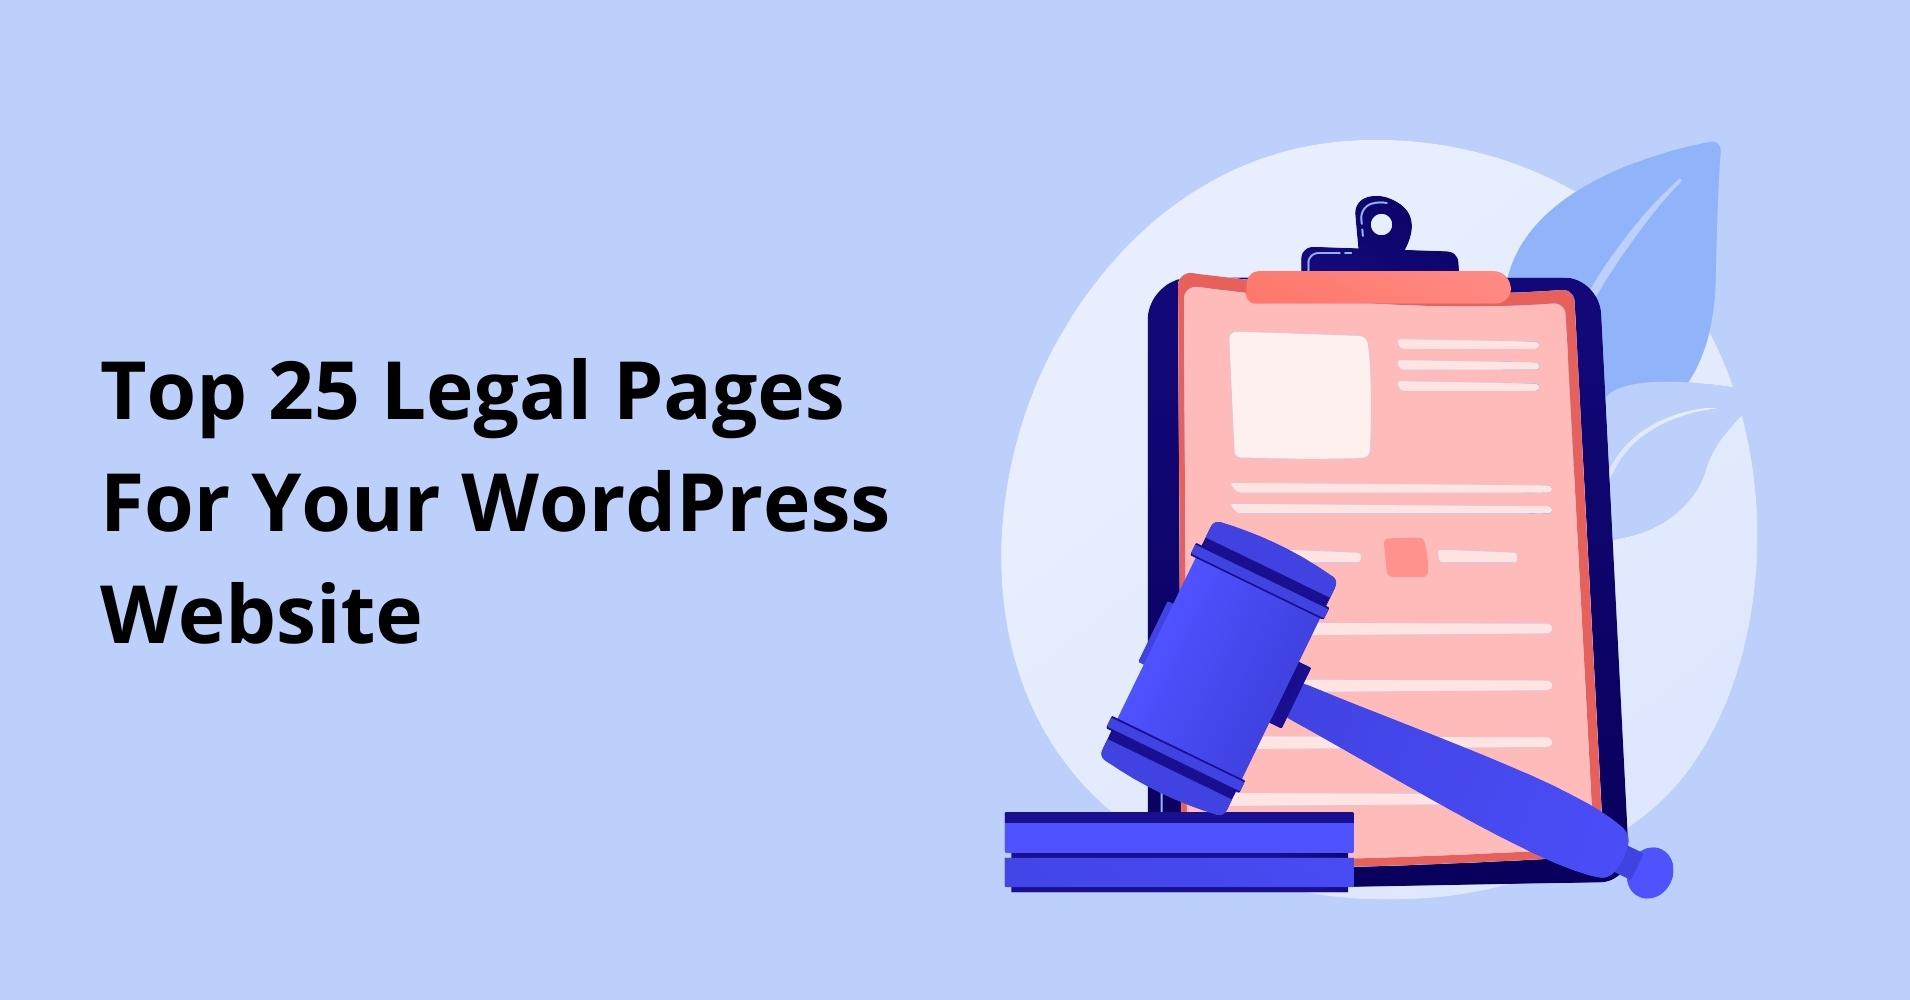 Top 25 Legal Pages For Your WordPress Website